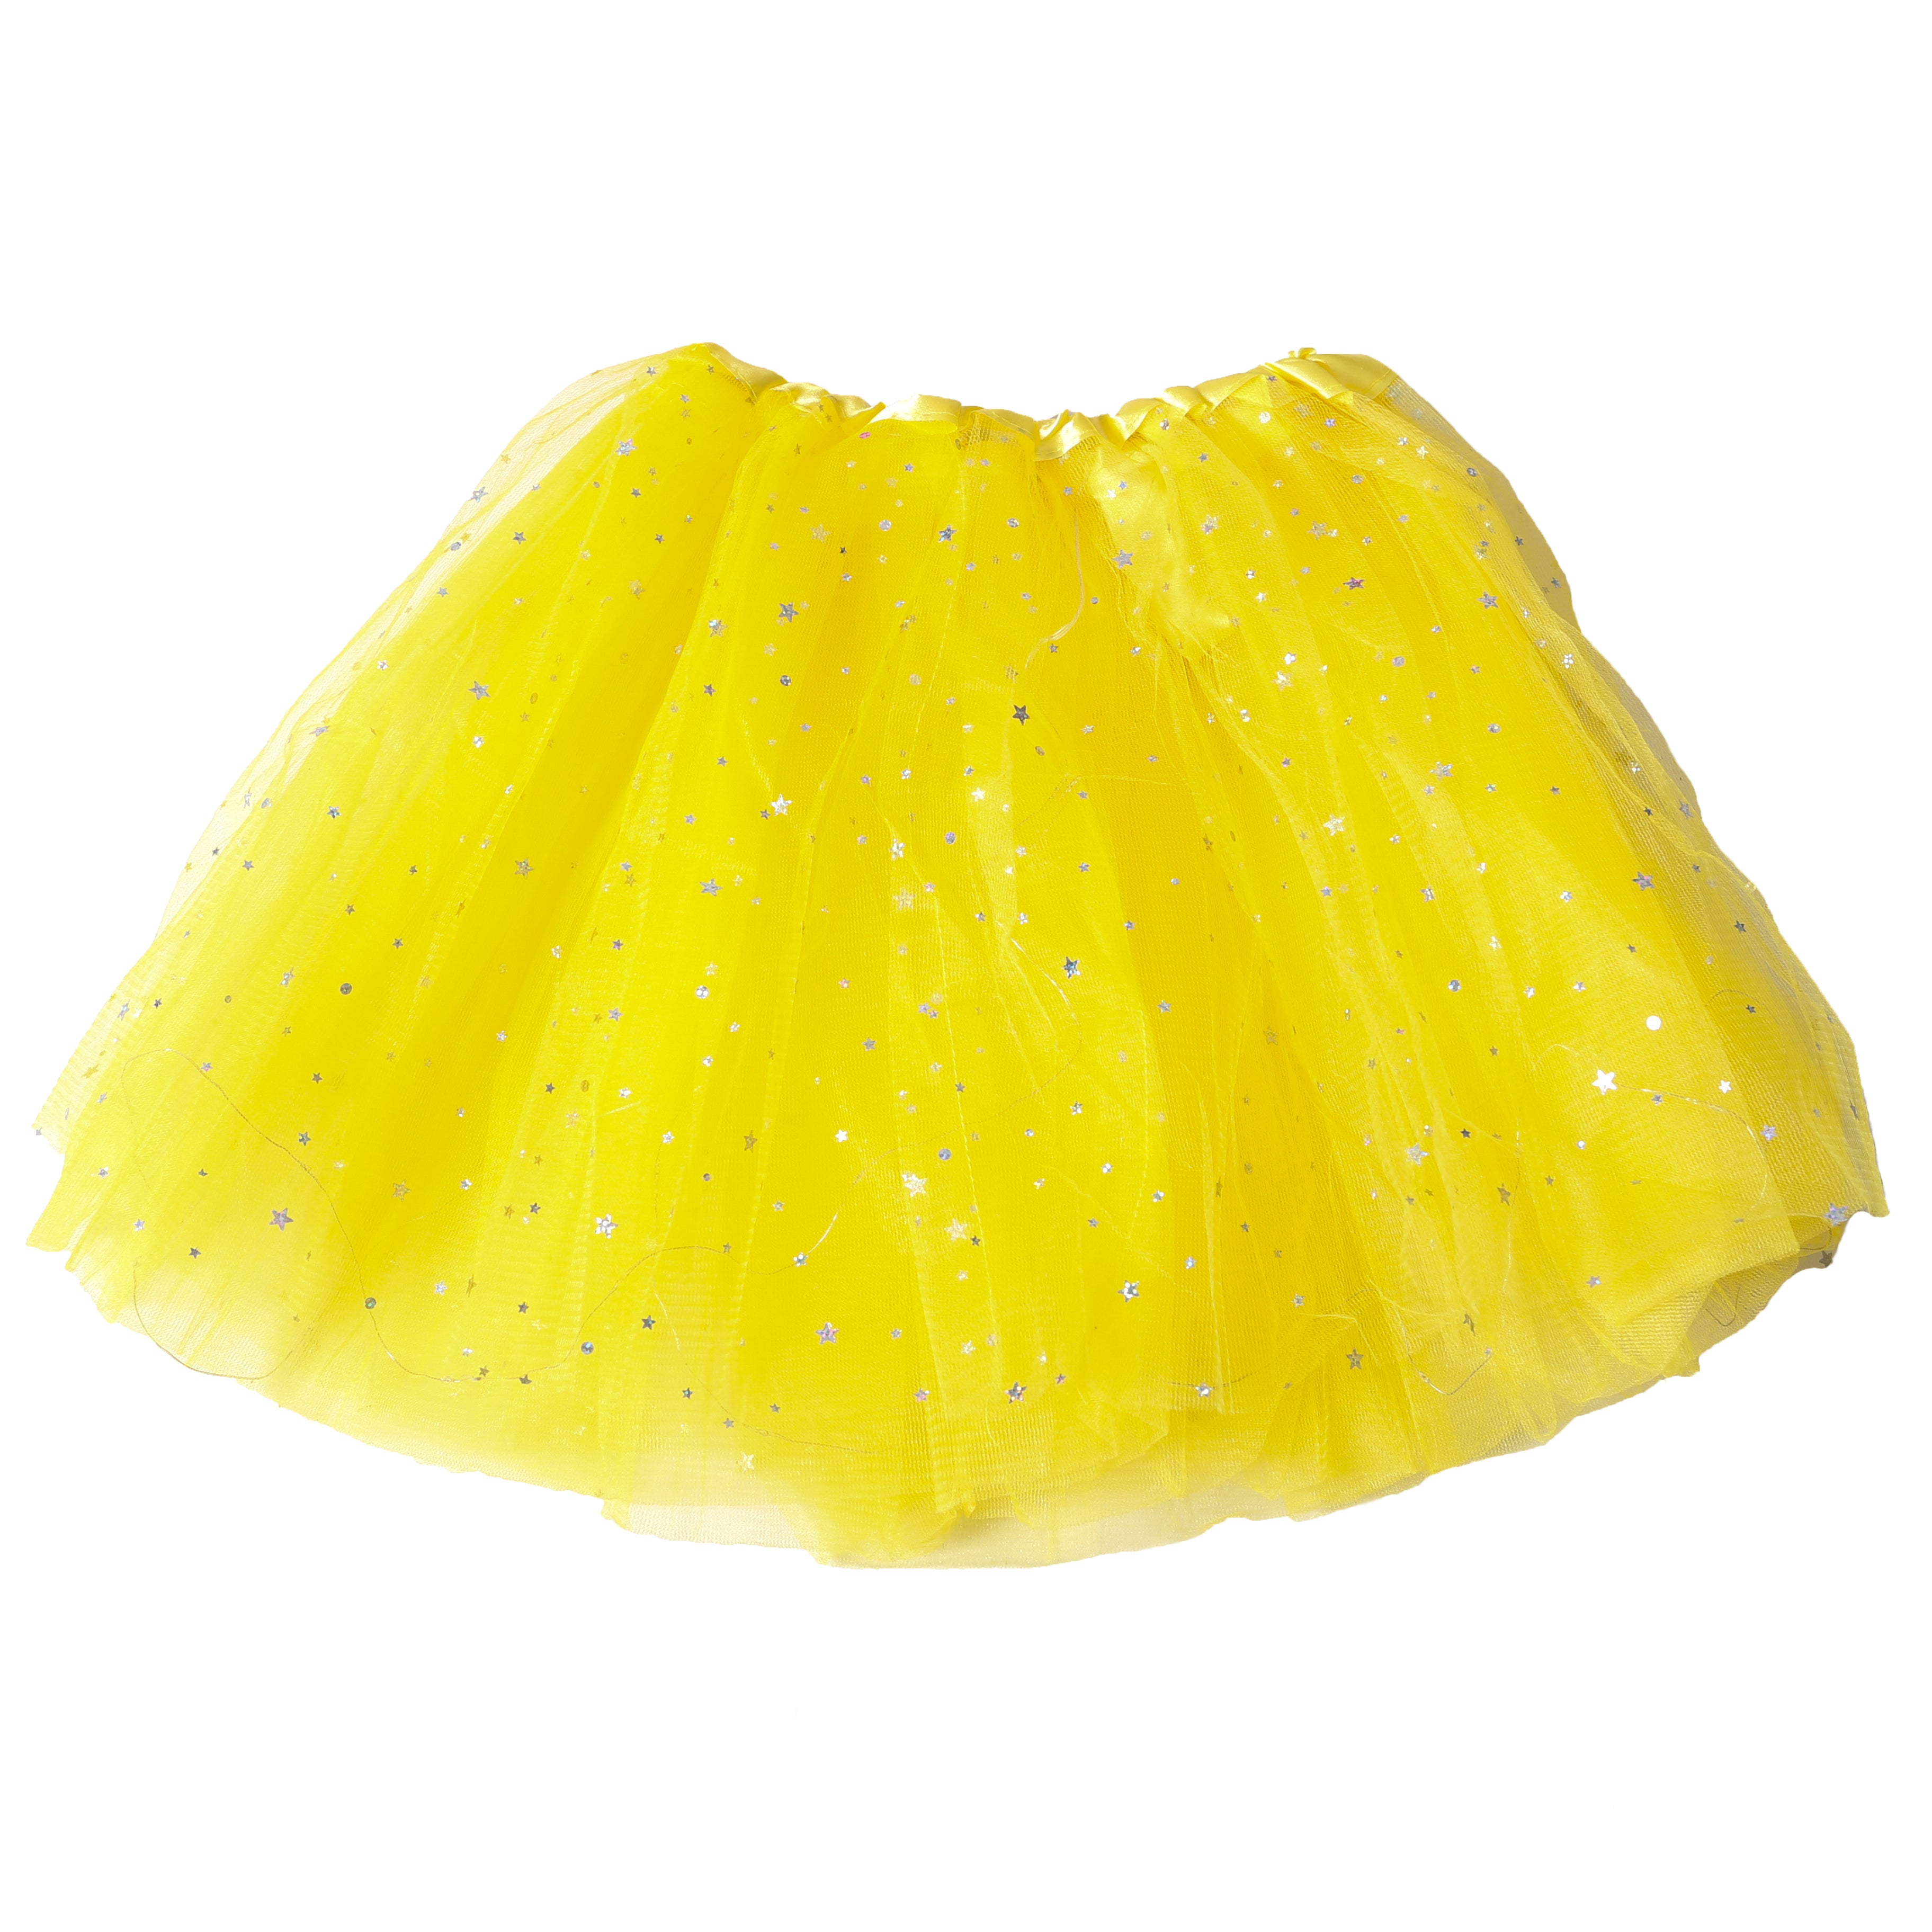 yellow light up LED tutu skirt Electro Glow | South Africa's Best LED Festival Gear & Rave Clothes - festivals outfits, clothes festival, festival clothing south africa, festival ideas outfits, festival outfits rave, festival wear, steam punk goggle, rave glasses, outfit for a rave, kaleidoscope glasses, diffraction glasses, clothes for a rave, rave sunglasses, spectral glasses, rave goggles, clothes for a rave, rave clothing south africa, festival wear south africa, accessories festival, rave sunglasses